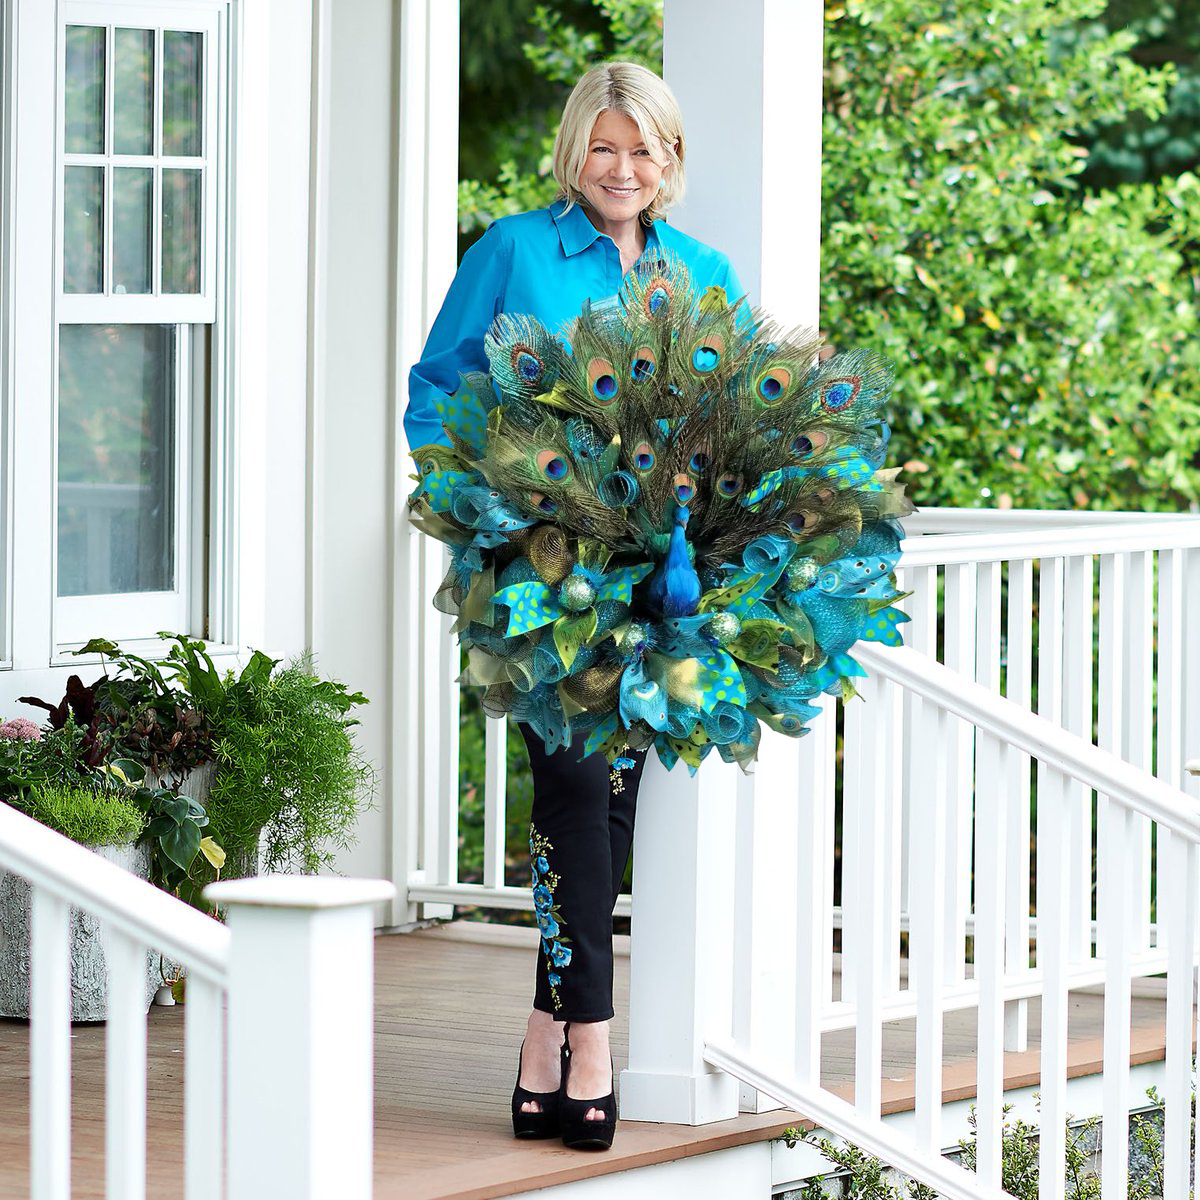 🔥Limited Time Sale 48% OFF🎉Handmade Peacock Wreath-Buy 2 Get Free Shipping